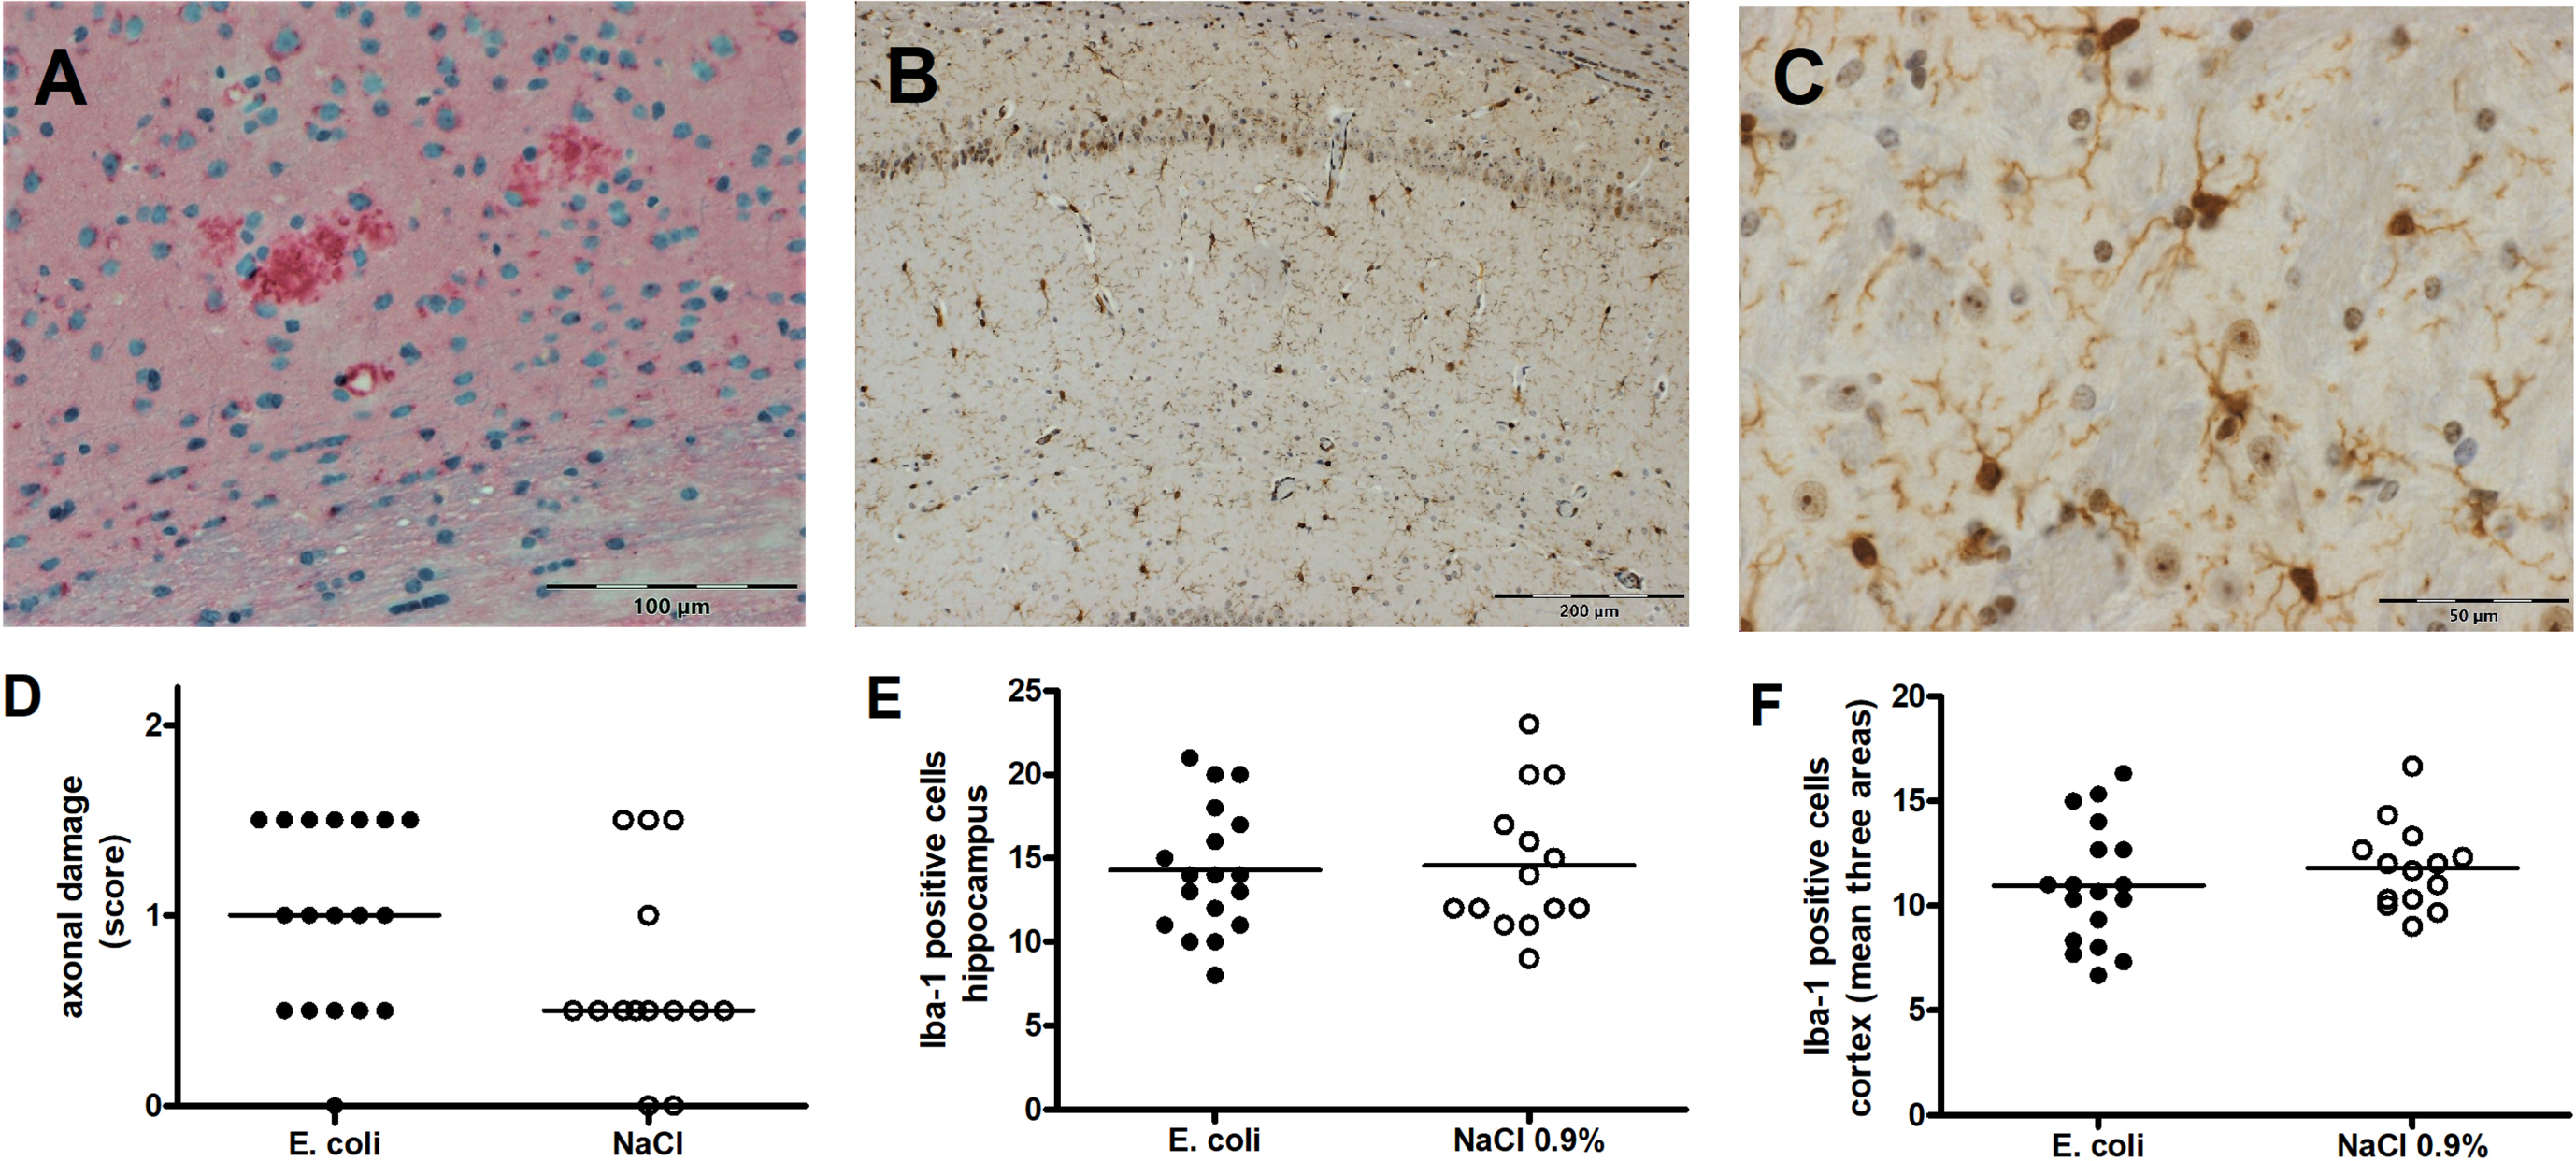 Axonal damage and microglia density in brains of Tg2576 +/- mice after intracerebral infection with E. coli. A) Representative amyloid-β protein precursor (AβPP) immunohistochemistry showing small lesions of axonal damage (pink) [35]. B) Representative Iba-1 staining showing microglial cells in the hippocampus (brown). C) Representative Iba-1 staining showing microglial cells in the neocortex (brown). D) Axonal damage quantified by a semiquantitative score (0 = no axonal damage, 3 = severe axonal damage) in brains of infected and non-infected Tg2576 +/- (medians and single values; p = 0.074, Mann-Whitney U-test). E) Numbers of microglial cells (means and single values) in the hippocampus of infected and non-infected Tg2576 +/- mice (p = 0.84, Student’s t-test). F) Numbers of microglial cells (means and single values of means of 3 areas) in the neocortex of infected and non-infected Tg2576 +/- mice (p = 0.37, Student's t-test).